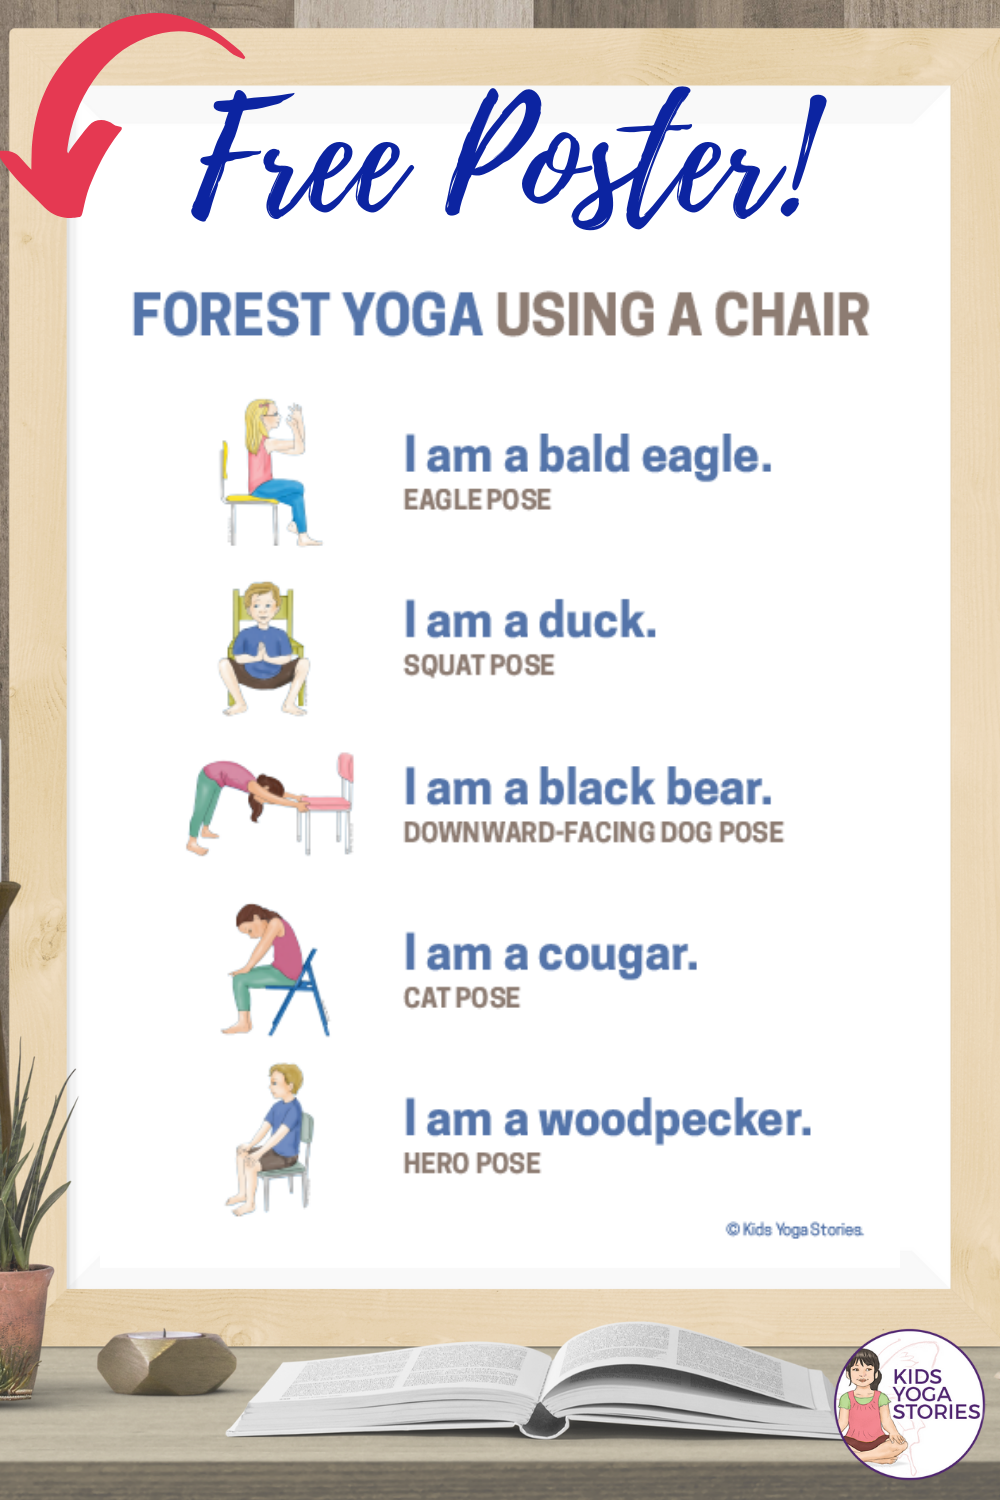 Forest Chair Yoga Poster | Kids Yoga Stories